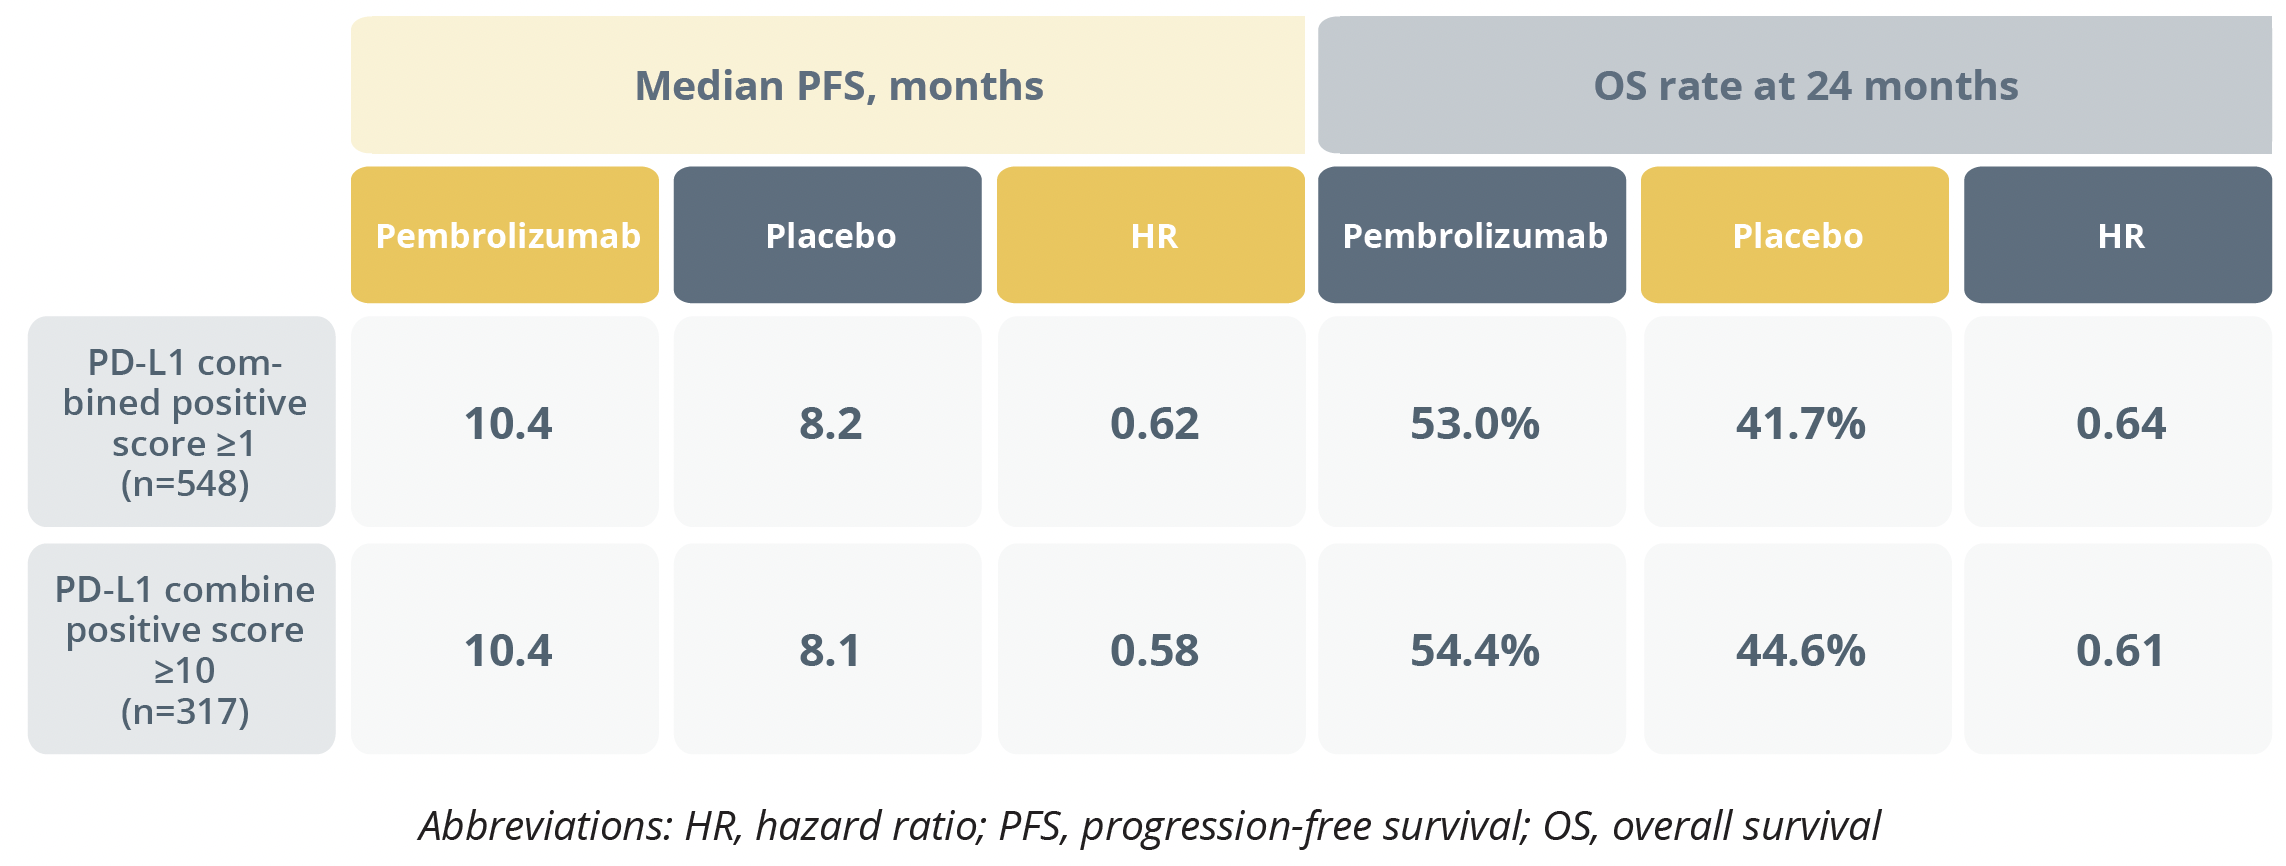 Improved survival outcomes with pembrolizumab over placebo regardless of PD-L1 status